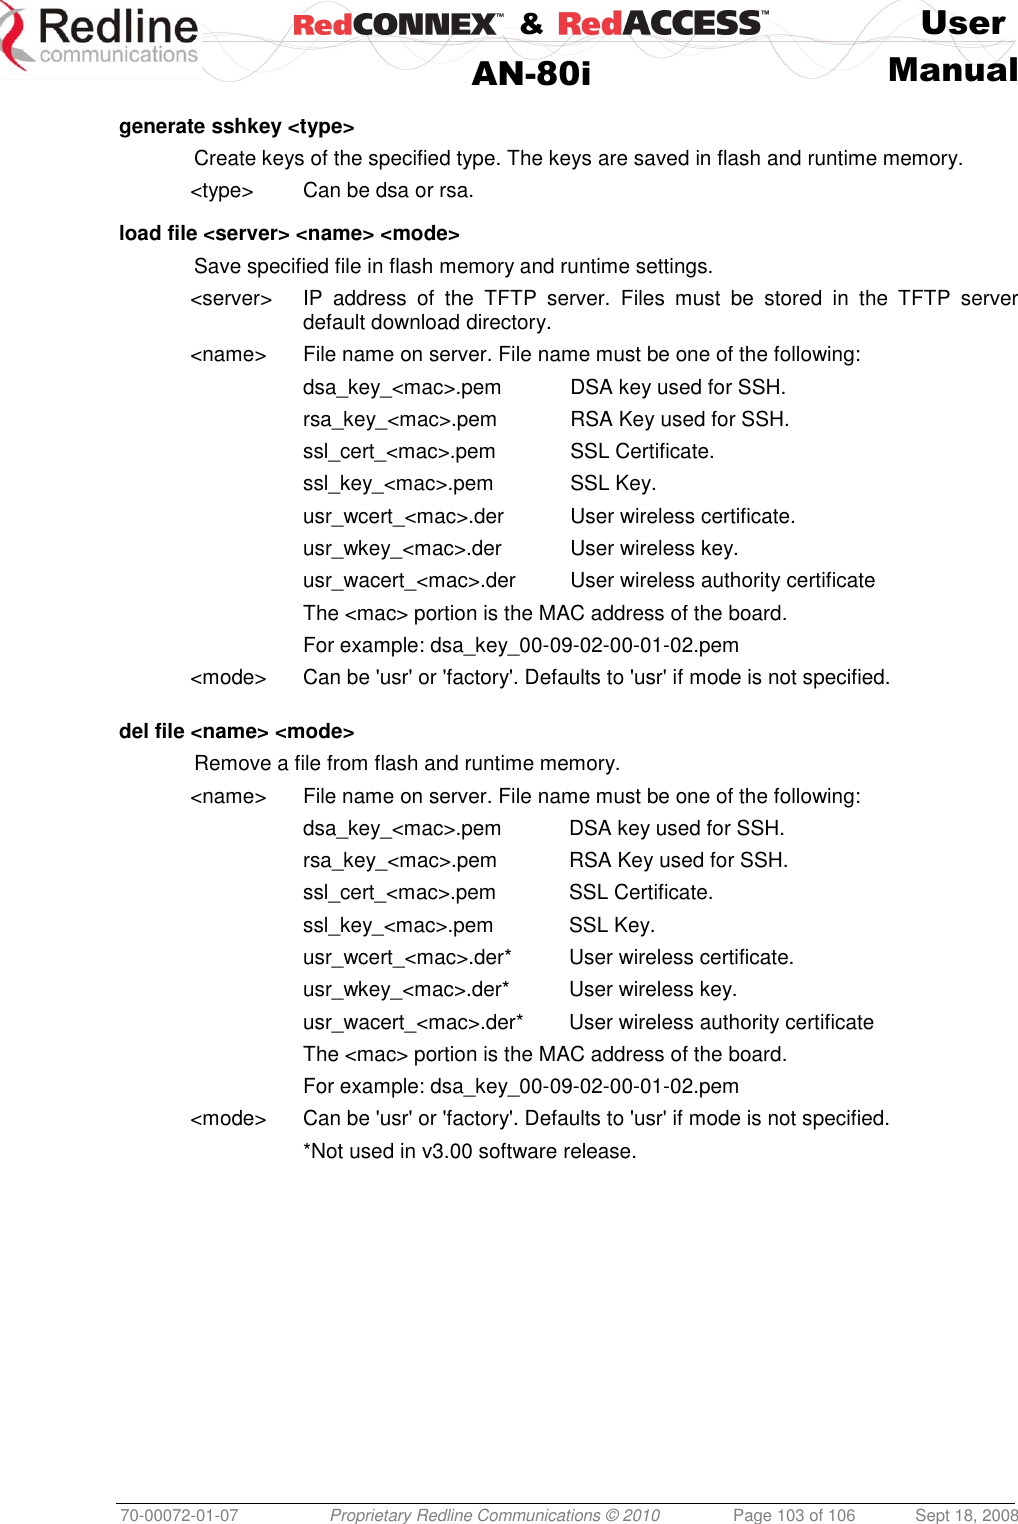    &amp;  User  AN-80i Manual  70-00072-01-07 Proprietary Redline Communications © 2010  Page 103 of 106  Sept 18, 2008  generate sshkey &lt;type&gt;   Create keys of the specified type. The keys are saved in flash and runtime memory. &lt;type&gt;  Can be dsa or rsa.  load file &lt;server&gt; &lt;name&gt; &lt;mode&gt;   Save specified file in flash memory and runtime settings. &lt;server&gt;  IP  address  of  the  TFTP  server.  Files  must  be  stored  in  the  TFTP  server default download directory. &lt;name&gt;  File name on server. File name must be one of the following: dsa_key_&lt;mac&gt;.pem  DSA key used for SSH. rsa_key_&lt;mac&gt;.pem  RSA Key used for SSH. ssl_cert_&lt;mac&gt;.pem  SSL Certificate. ssl_key_&lt;mac&gt;.pem  SSL Key. usr_wcert_&lt;mac&gt;.der  User wireless certificate. usr_wkey_&lt;mac&gt;.der  User wireless key. usr_wacert_&lt;mac&gt;.der  User wireless authority certificate The &lt;mac&gt; portion is the MAC address of the board. For example: dsa_key_00-09-02-00-01-02.pem &lt;mode&gt;  Can be &apos;usr&apos; or &apos;factory&apos;. Defaults to &apos;usr&apos; if mode is not specified.   del file &lt;name&gt; &lt;mode&gt;    Remove a file from flash and runtime memory. &lt;name&gt;  File name on server. File name must be one of the following: dsa_key_&lt;mac&gt;.pem  DSA key used for SSH. rsa_key_&lt;mac&gt;.pem  RSA Key used for SSH. ssl_cert_&lt;mac&gt;.pem  SSL Certificate. ssl_key_&lt;mac&gt;.pem  SSL Key. usr_wcert_&lt;mac&gt;.der*  User wireless certificate. usr_wkey_&lt;mac&gt;.der*  User wireless key. usr_wacert_&lt;mac&gt;.der*  User wireless authority certificate The &lt;mac&gt; portion is the MAC address of the board. For example: dsa_key_00-09-02-00-01-02.pem &lt;mode&gt;  Can be &apos;usr&apos; or &apos;factory&apos;. Defaults to &apos;usr&apos; if mode is not specified.   *Not used in v3.00 software release.  